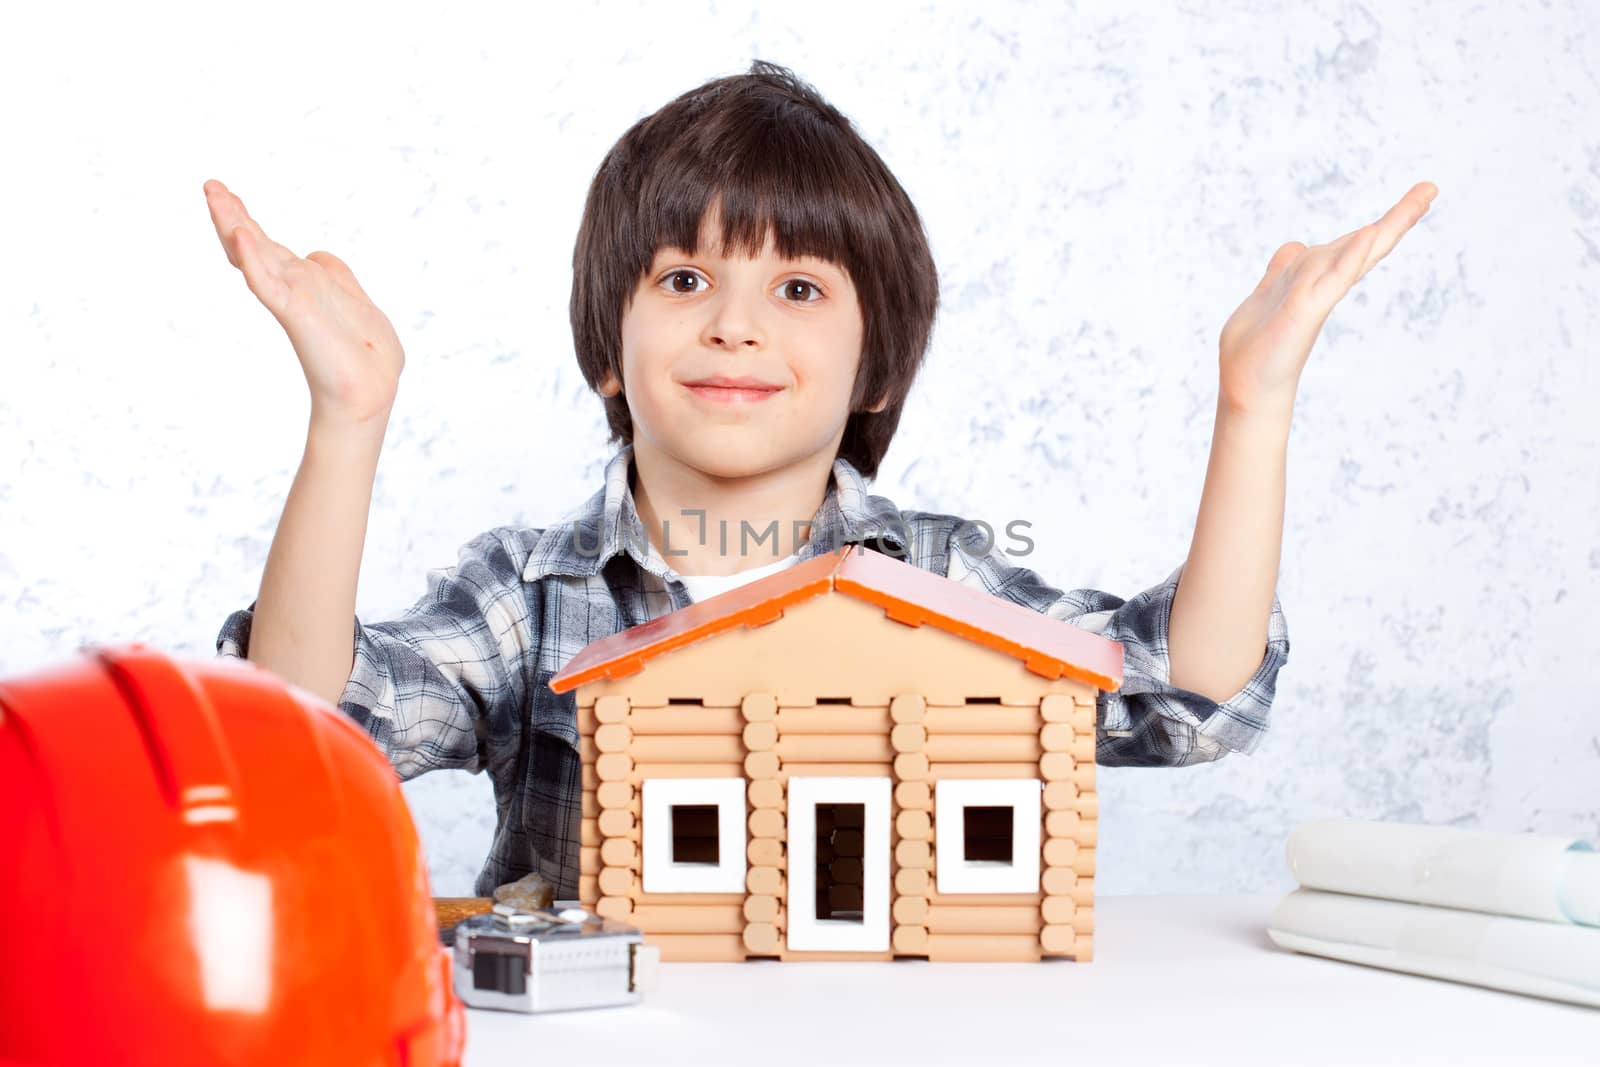 boy built a new house and shows his hands up